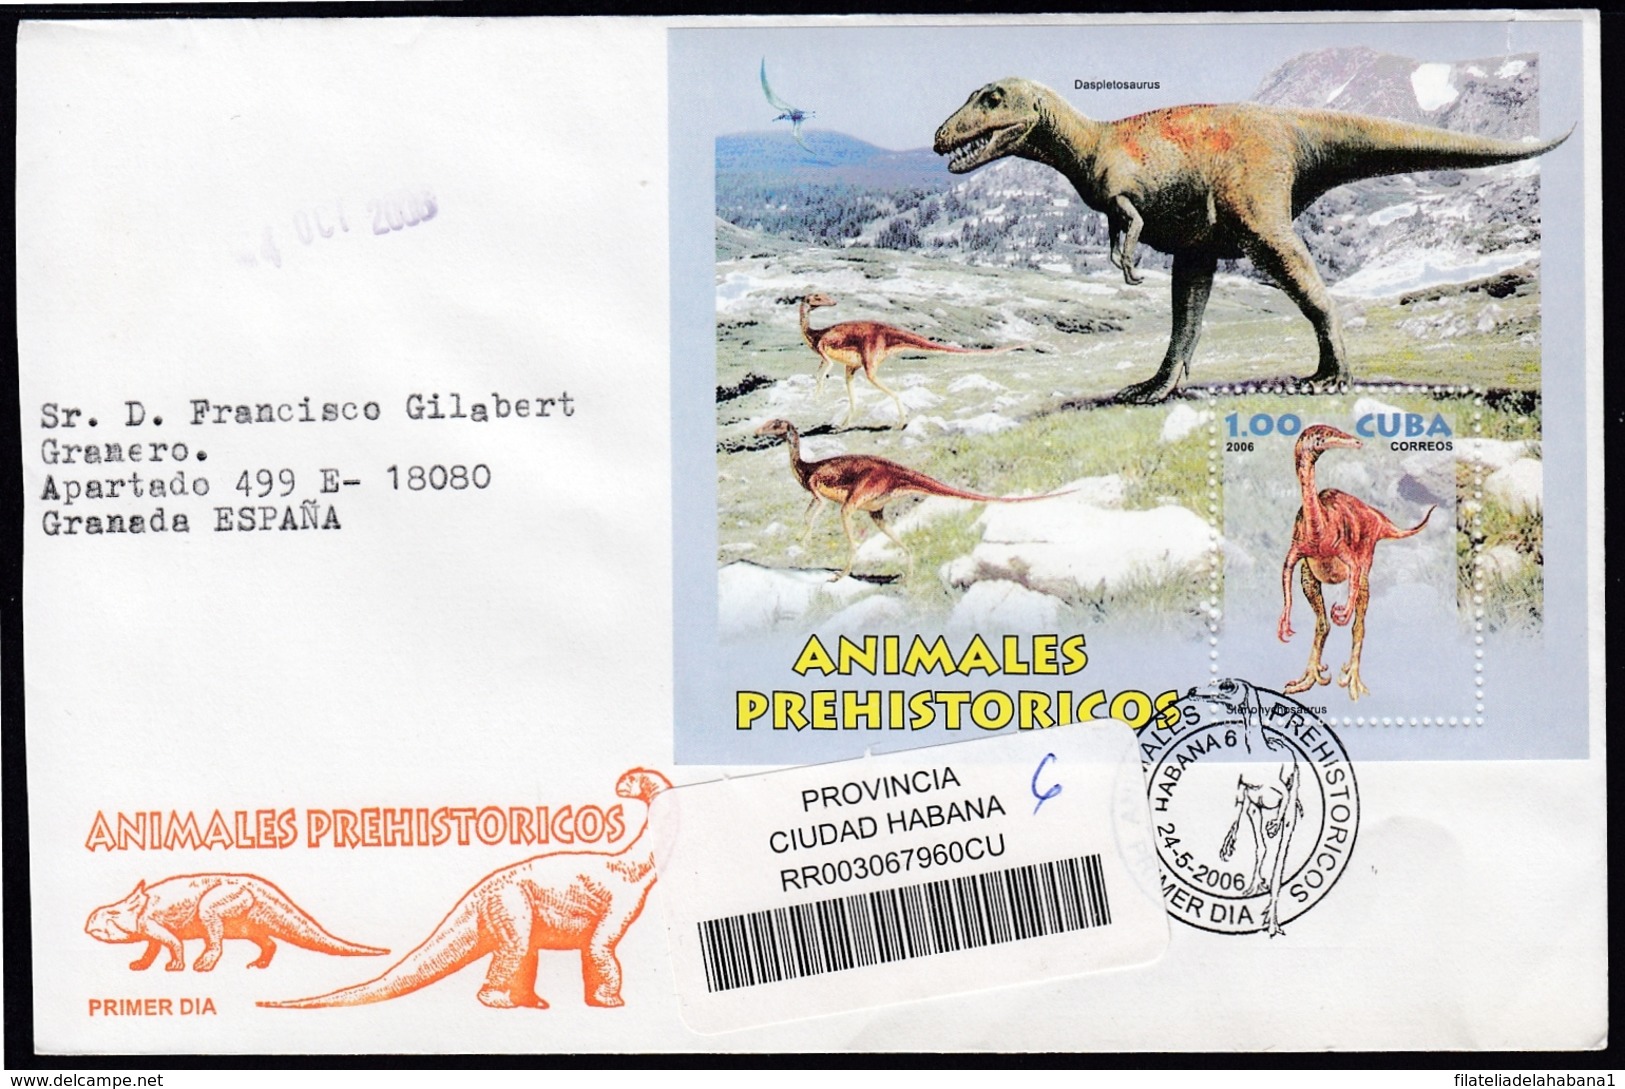 2006-FDC-122 CUBA FDC 2006. REGISTERED COVER TO SPAIN. ANIMALES PREHISTORICOS, DINOSAURIOS, DINOSAUR, PALEONTOLOGY. - FDC